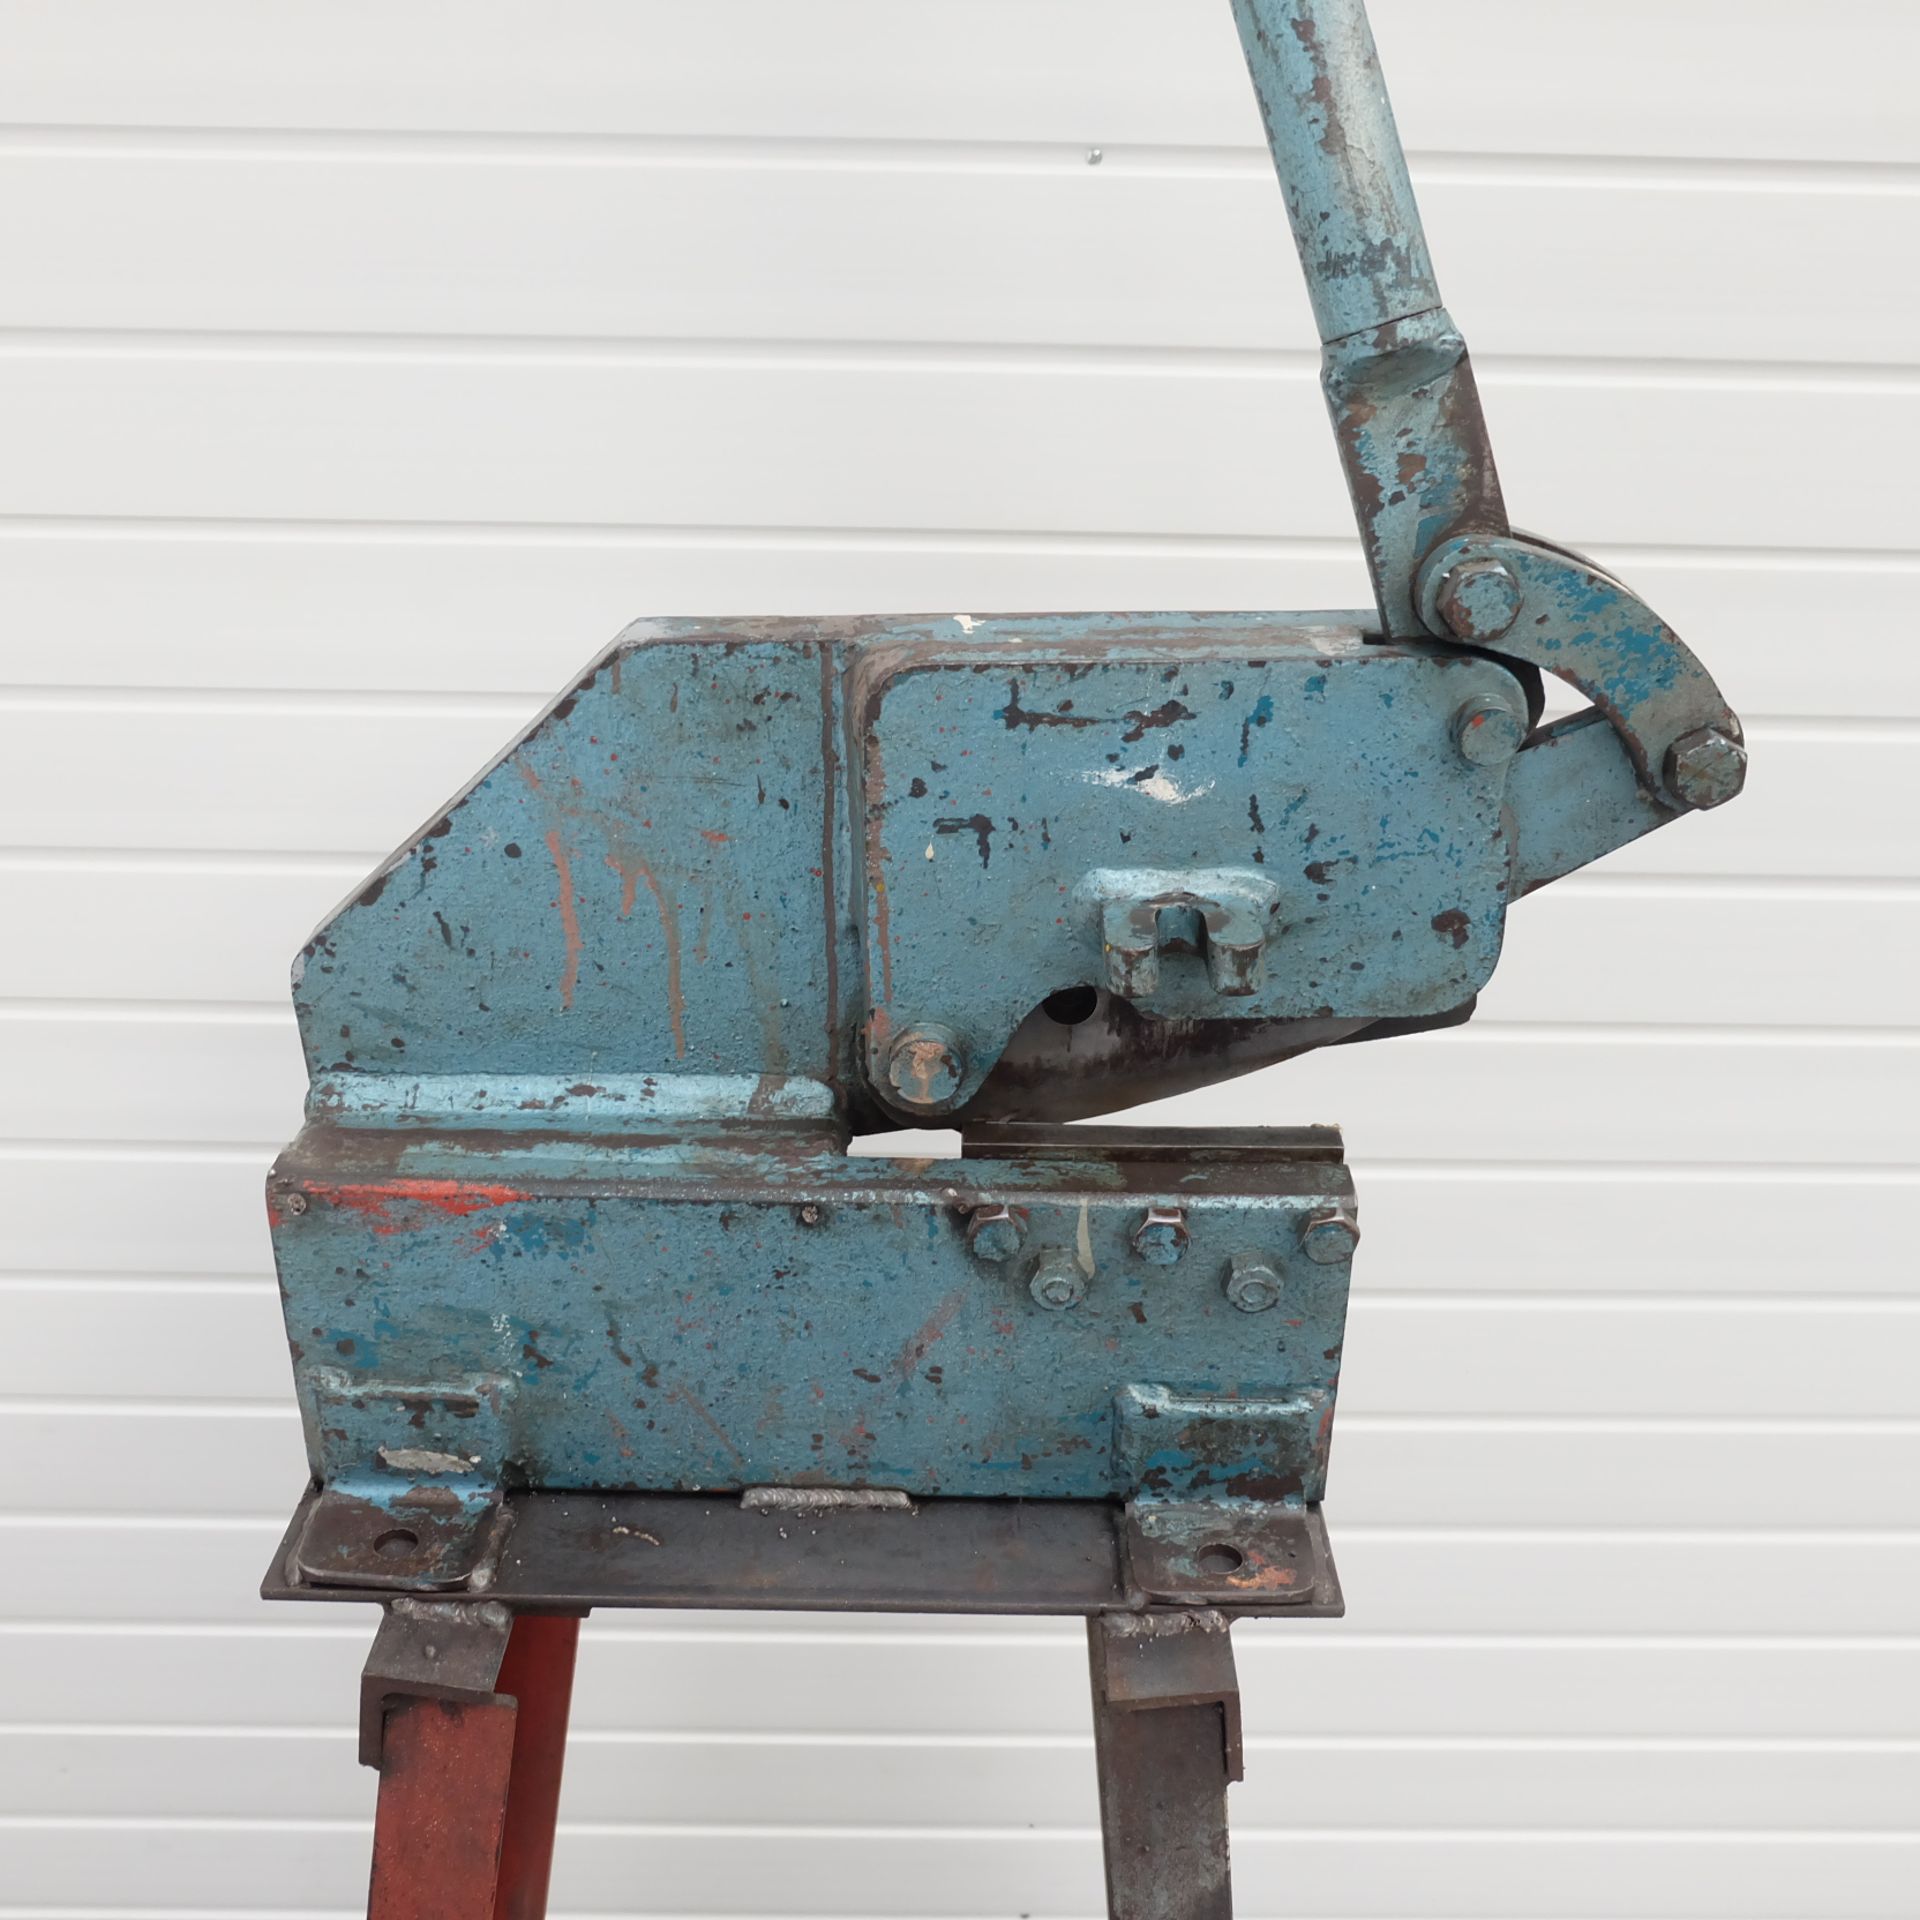 Kingsland 6" Bench Mounted Cropper On Steel Stand. Capacity: 6" Blade Length. - Image 2 of 5